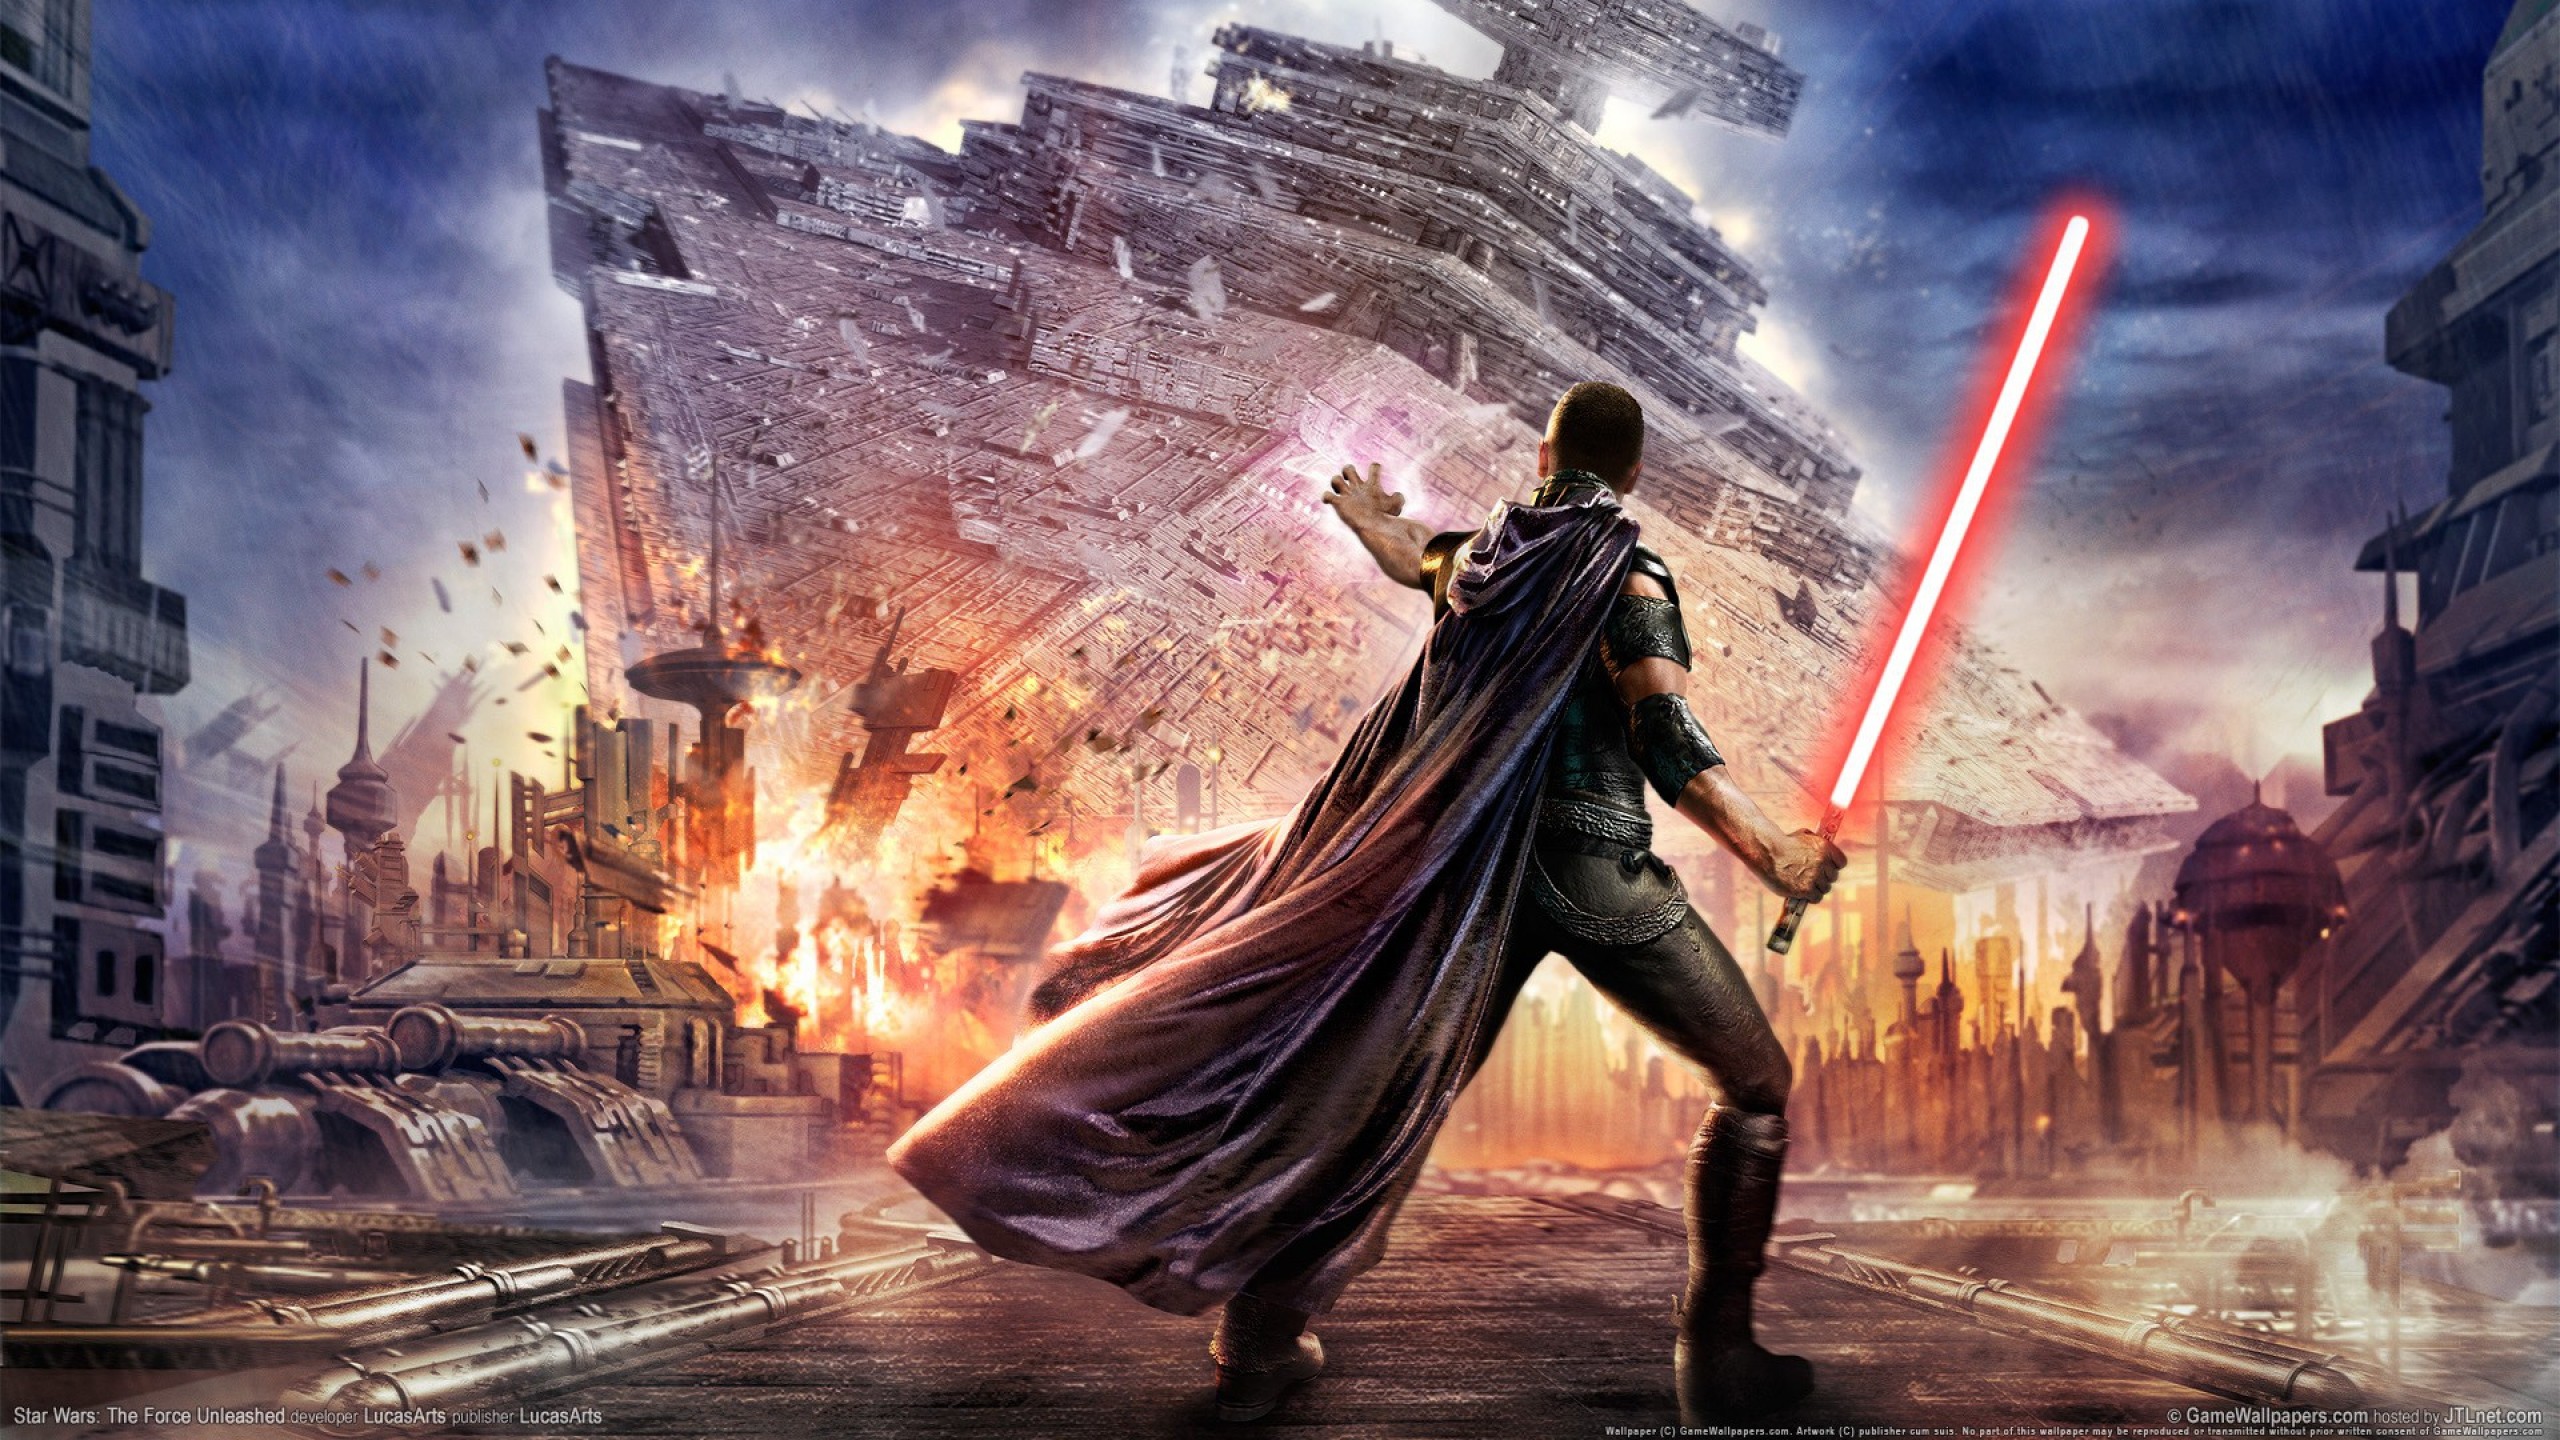 Star Wars Video Games Star Wars The Force Unleashed Video Game Art Star Destroyer 2560x1440